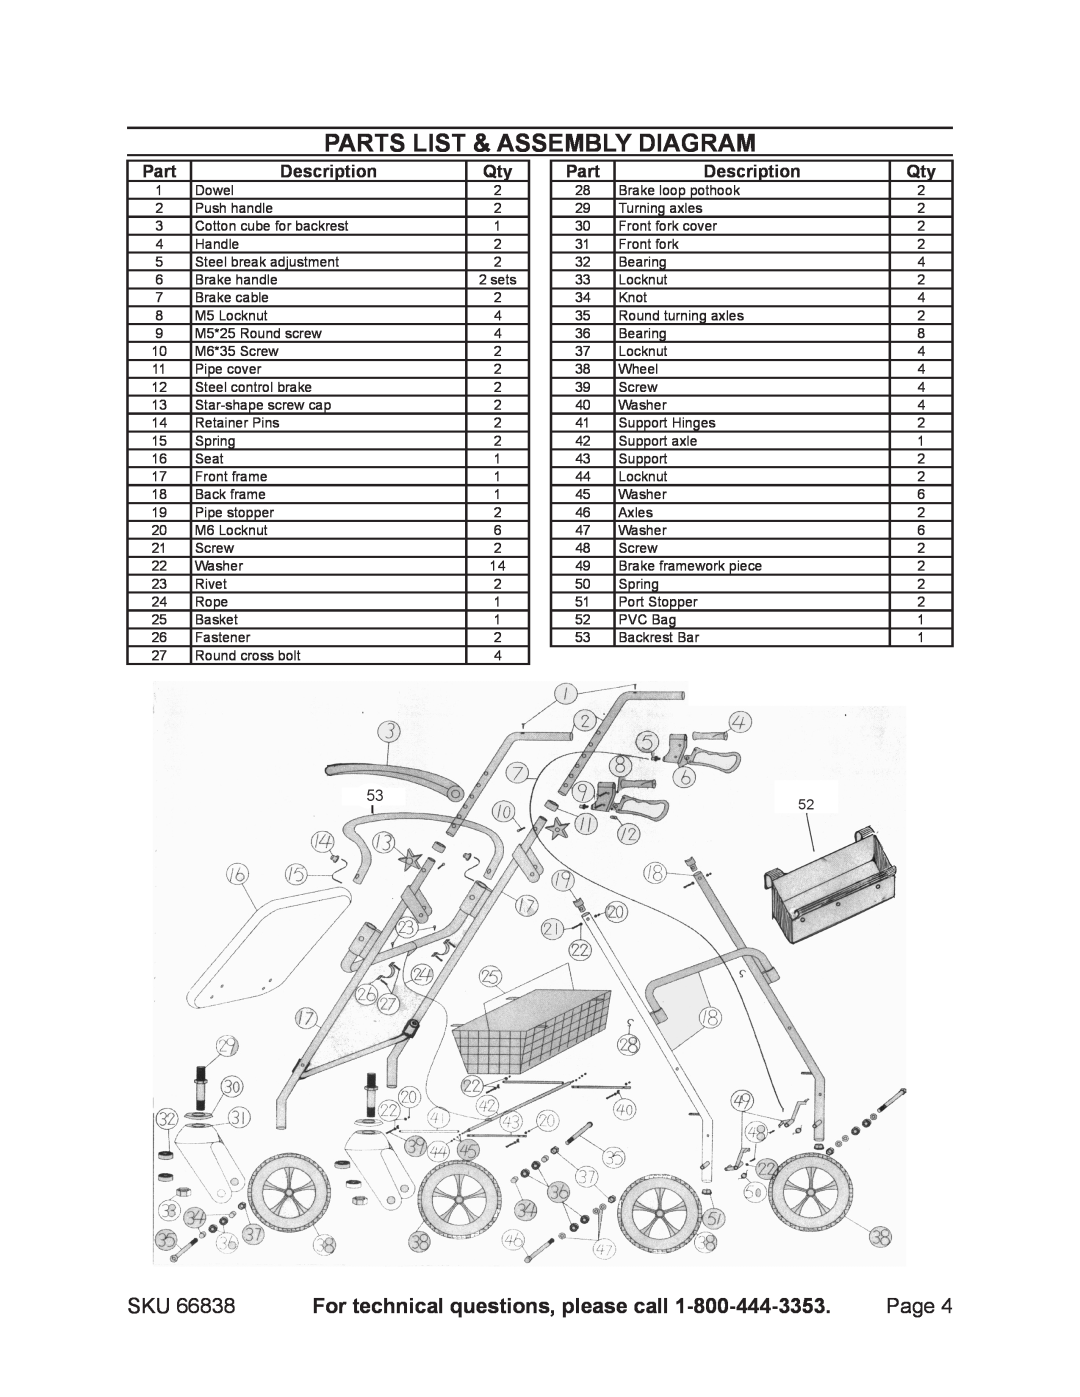 Harbor Freight Tools 66838 Parts List & Assembly diagram, Description, For technical questions, please call, Page 